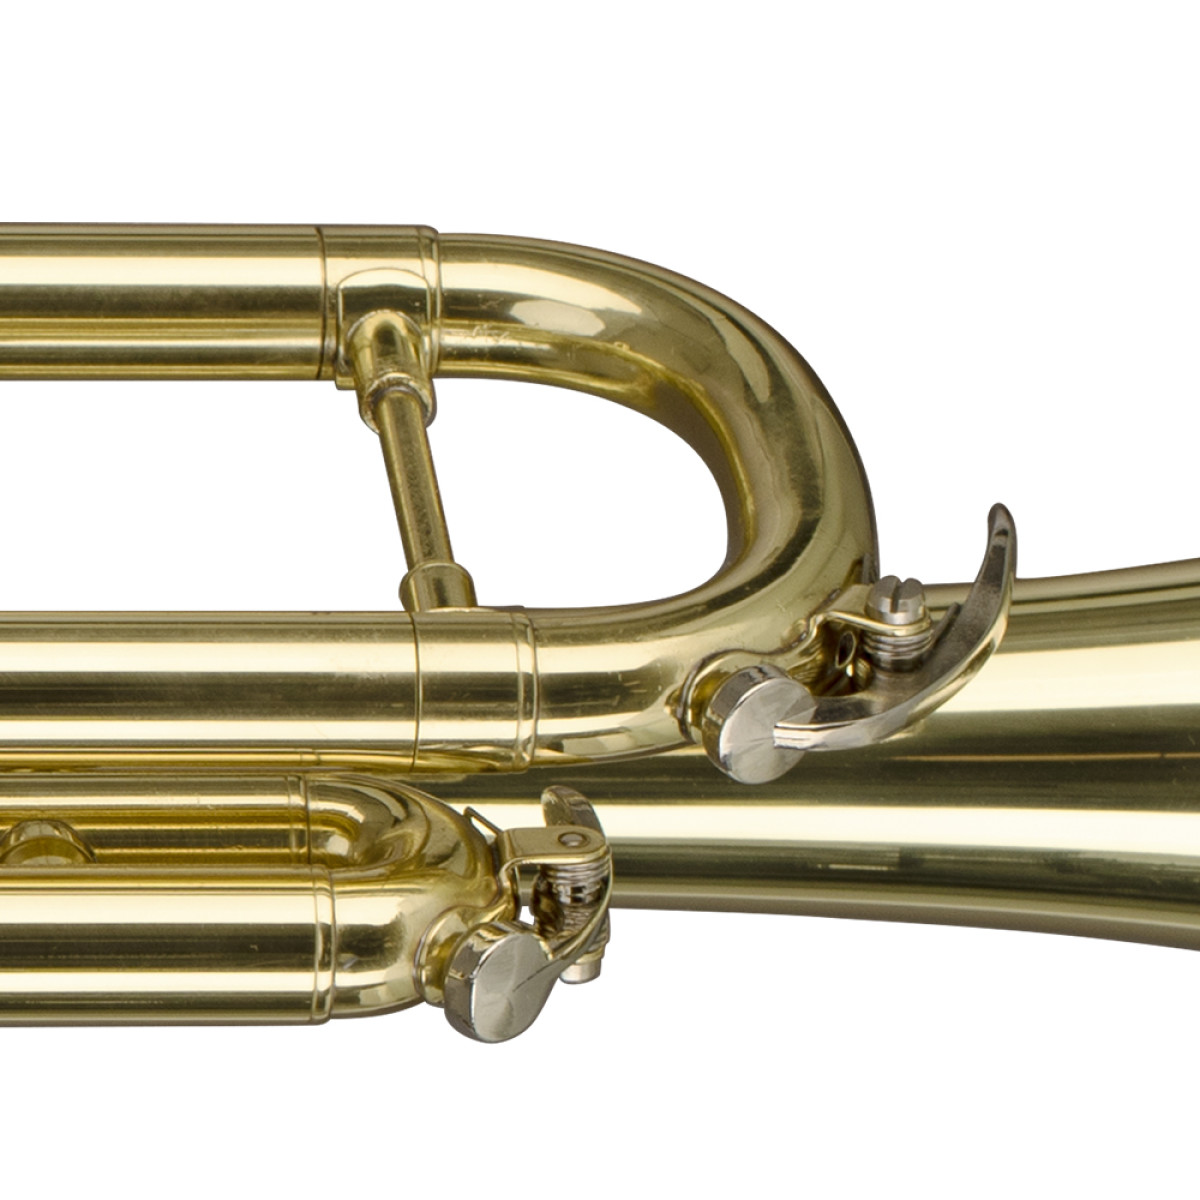 Stagg Tr215s - Trumpet of study - Variation 2